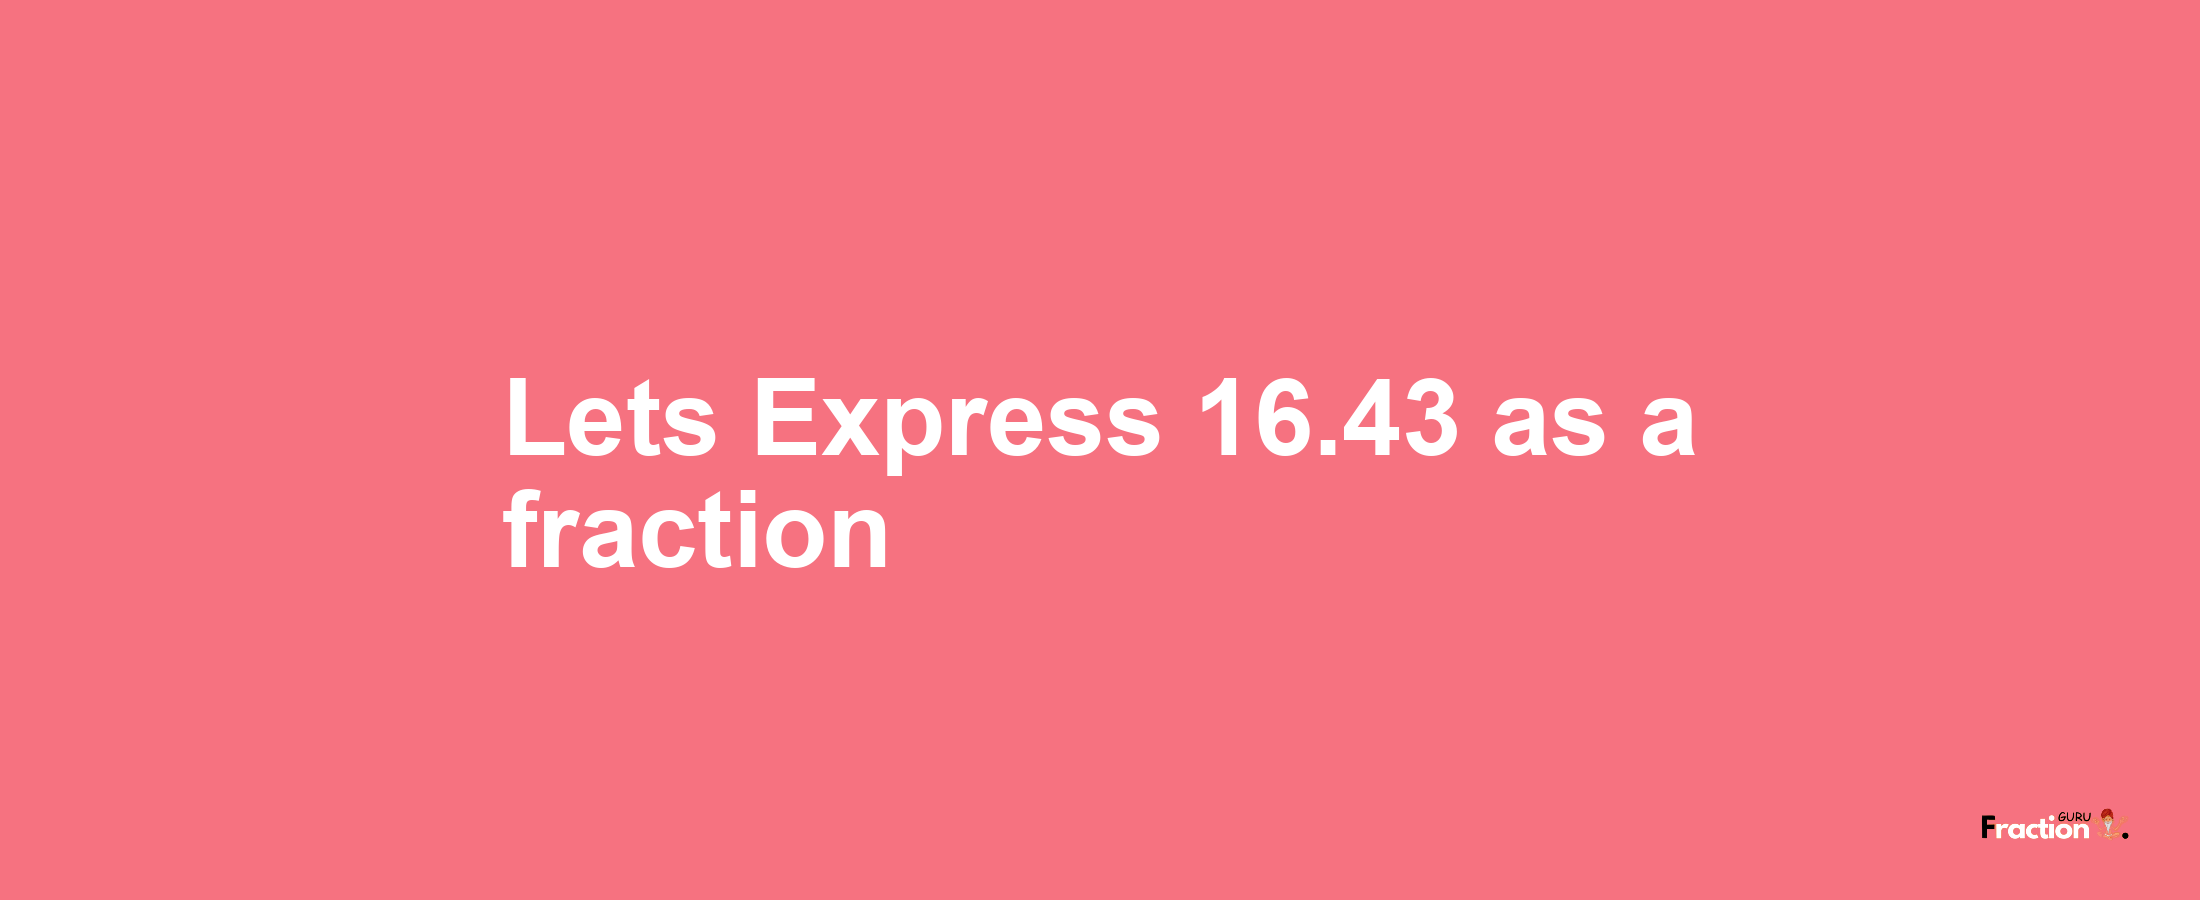 Lets Express 16.43 as afraction